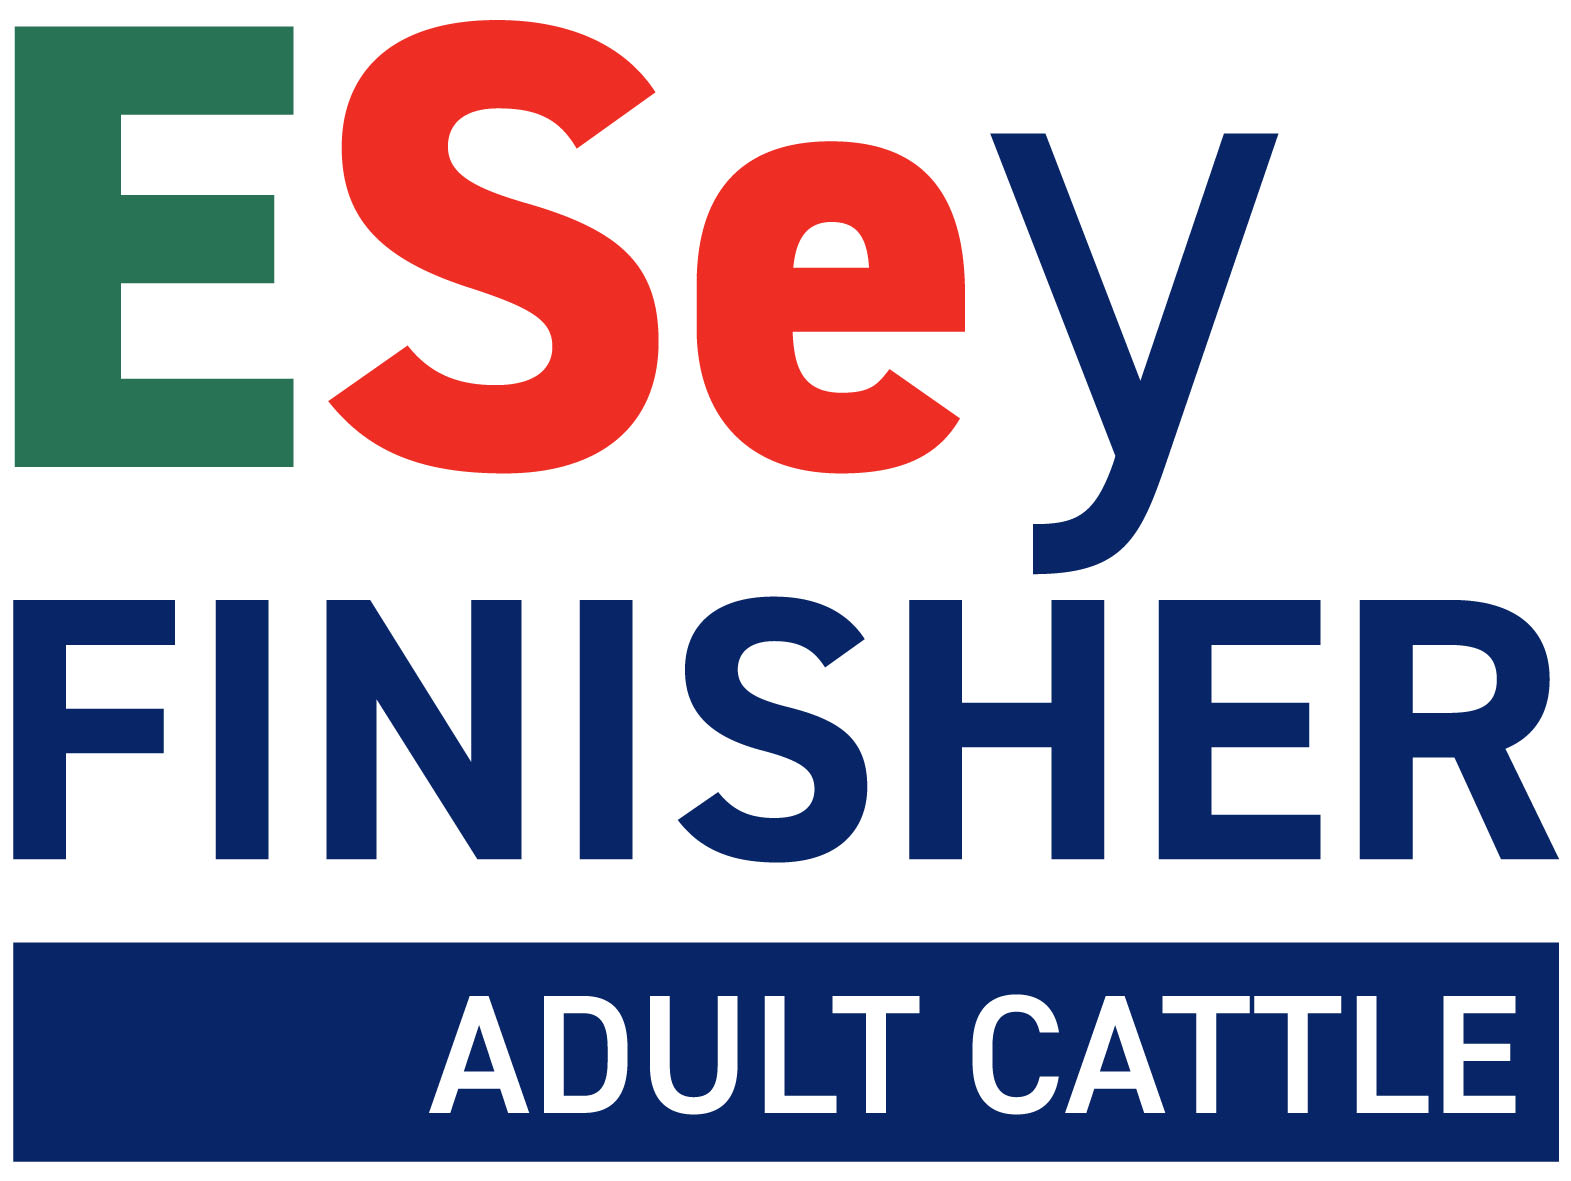 Beef Cattle ESey FINISHER ADULT CATTLE